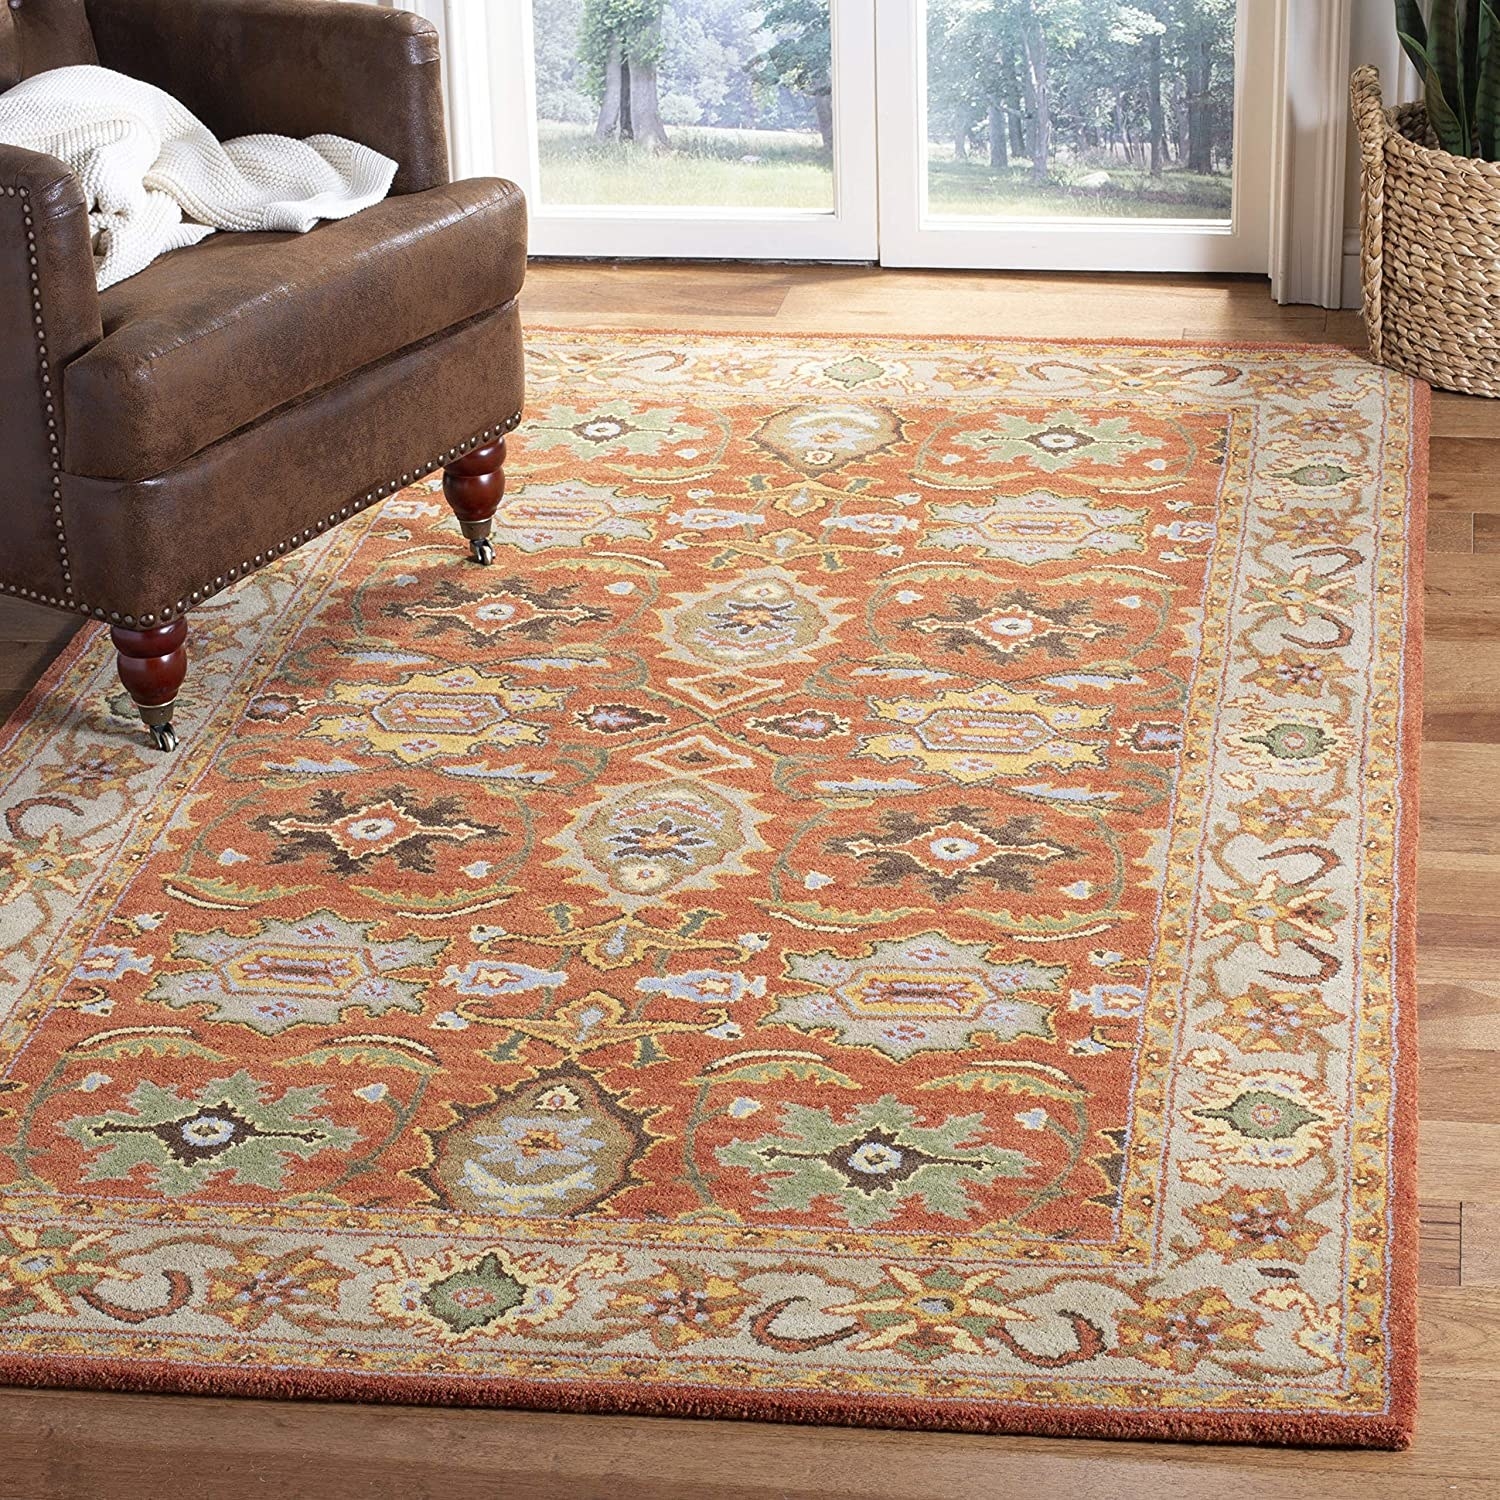 the rust and beige safavieh area rug in a sitting area